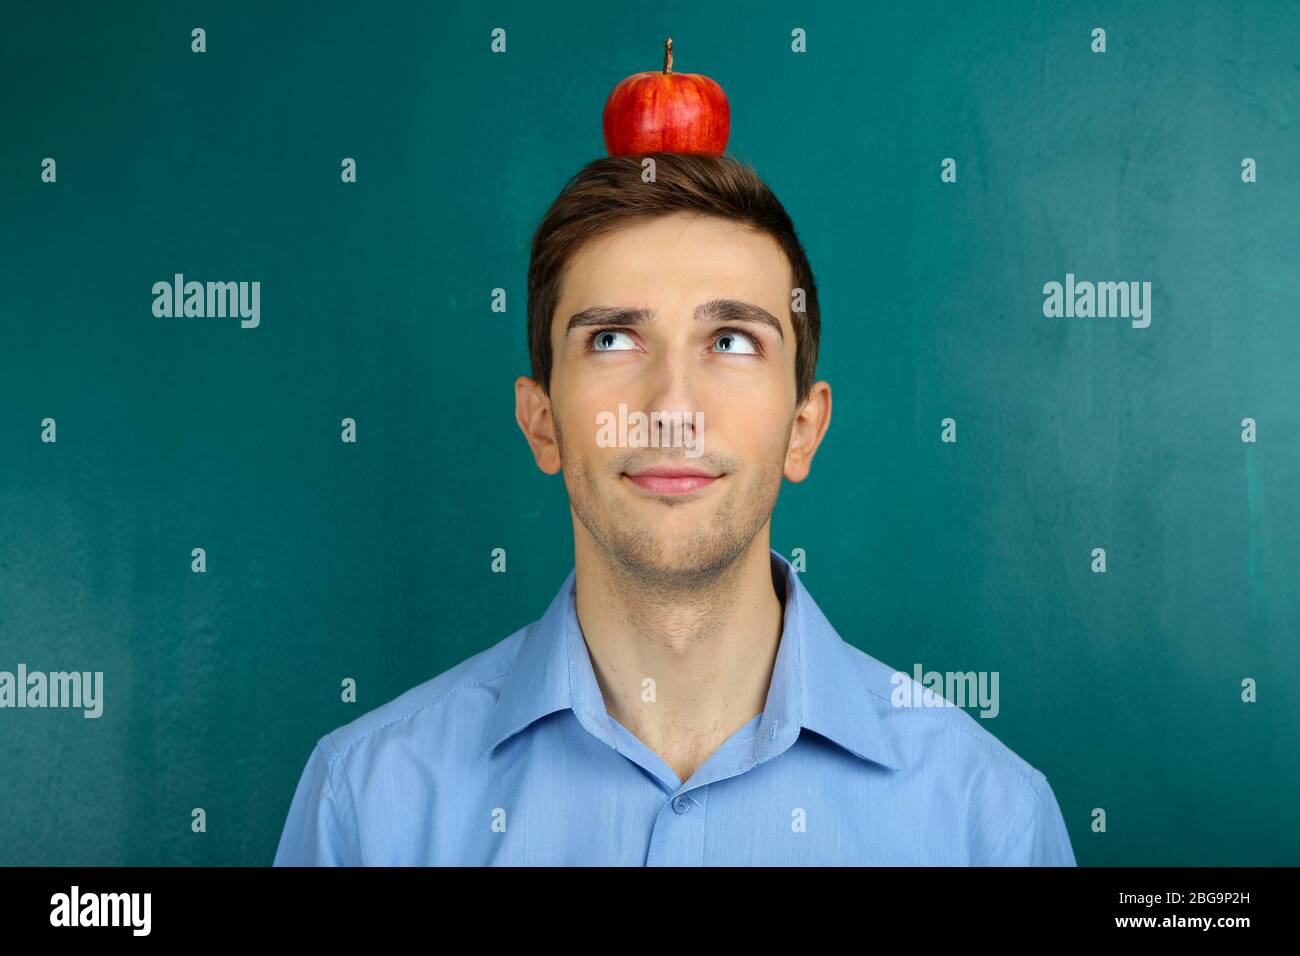 Young teacher with apple on his heard on chalkboard background Stock Photo